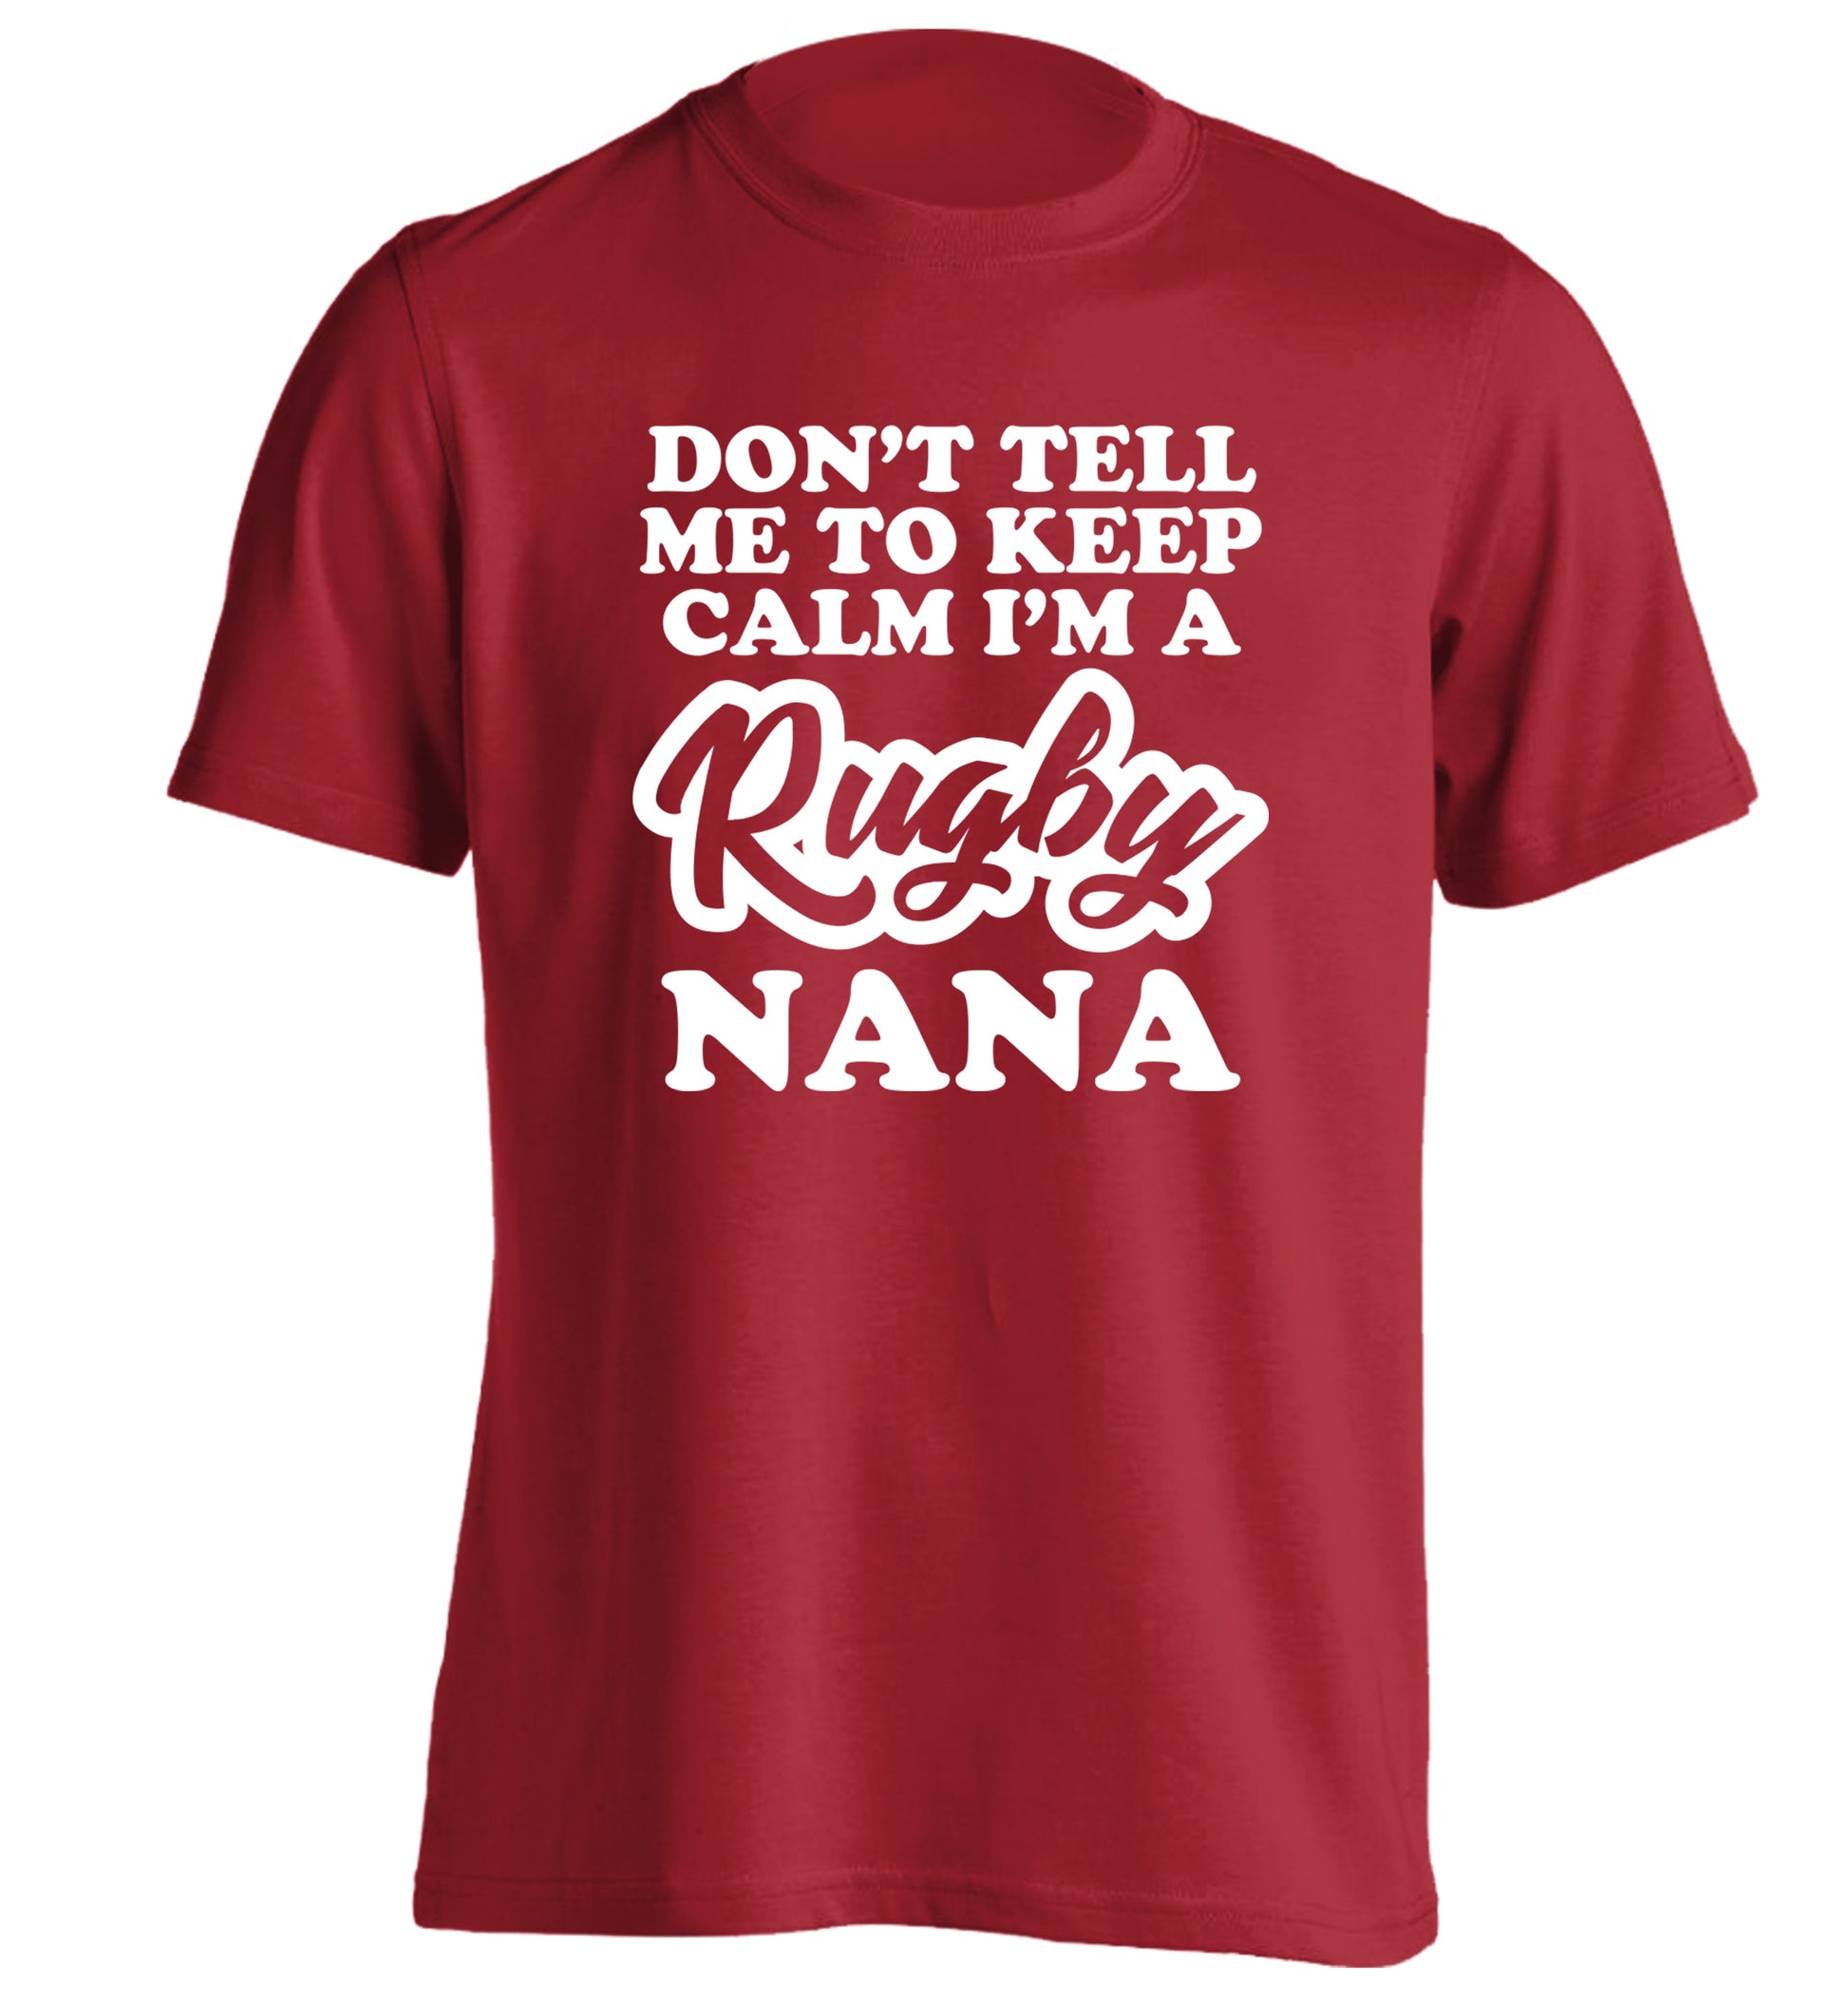 Don't tell me to keep calm I'm a rugby nana adults unisex red Tshirt 2XL